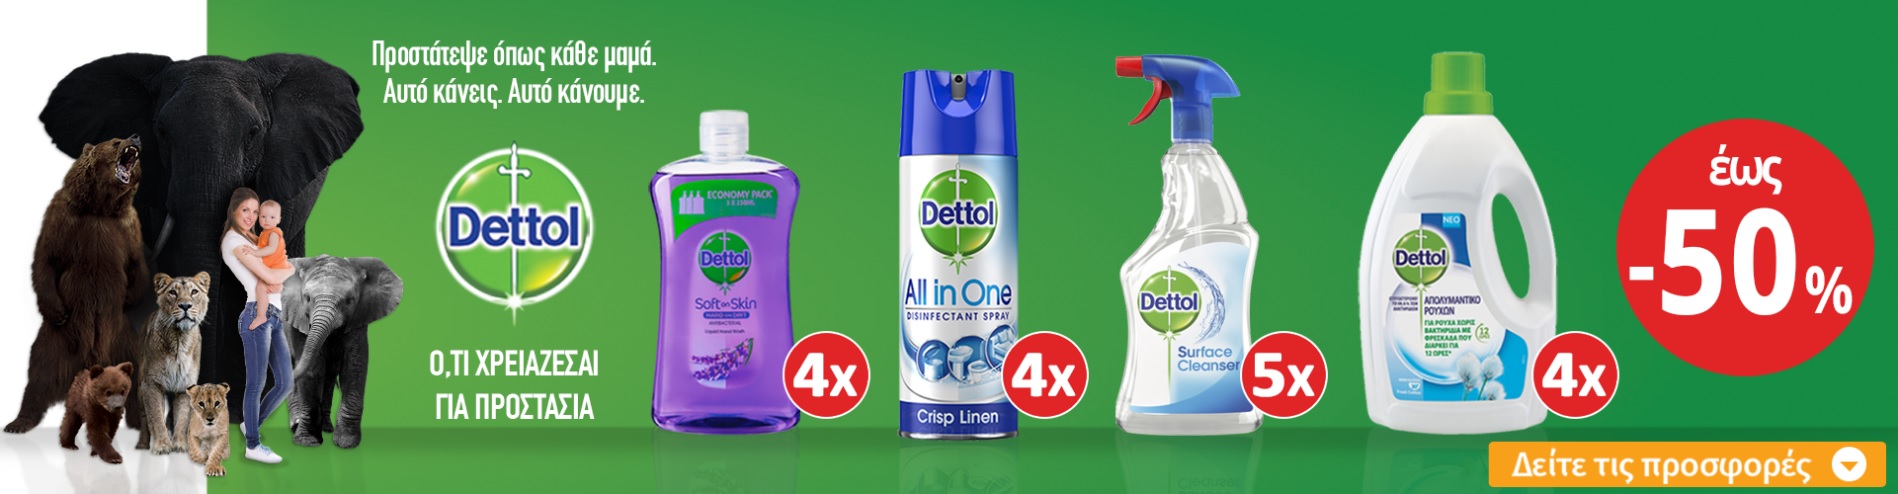 Don't miss these offers on DETTOL products